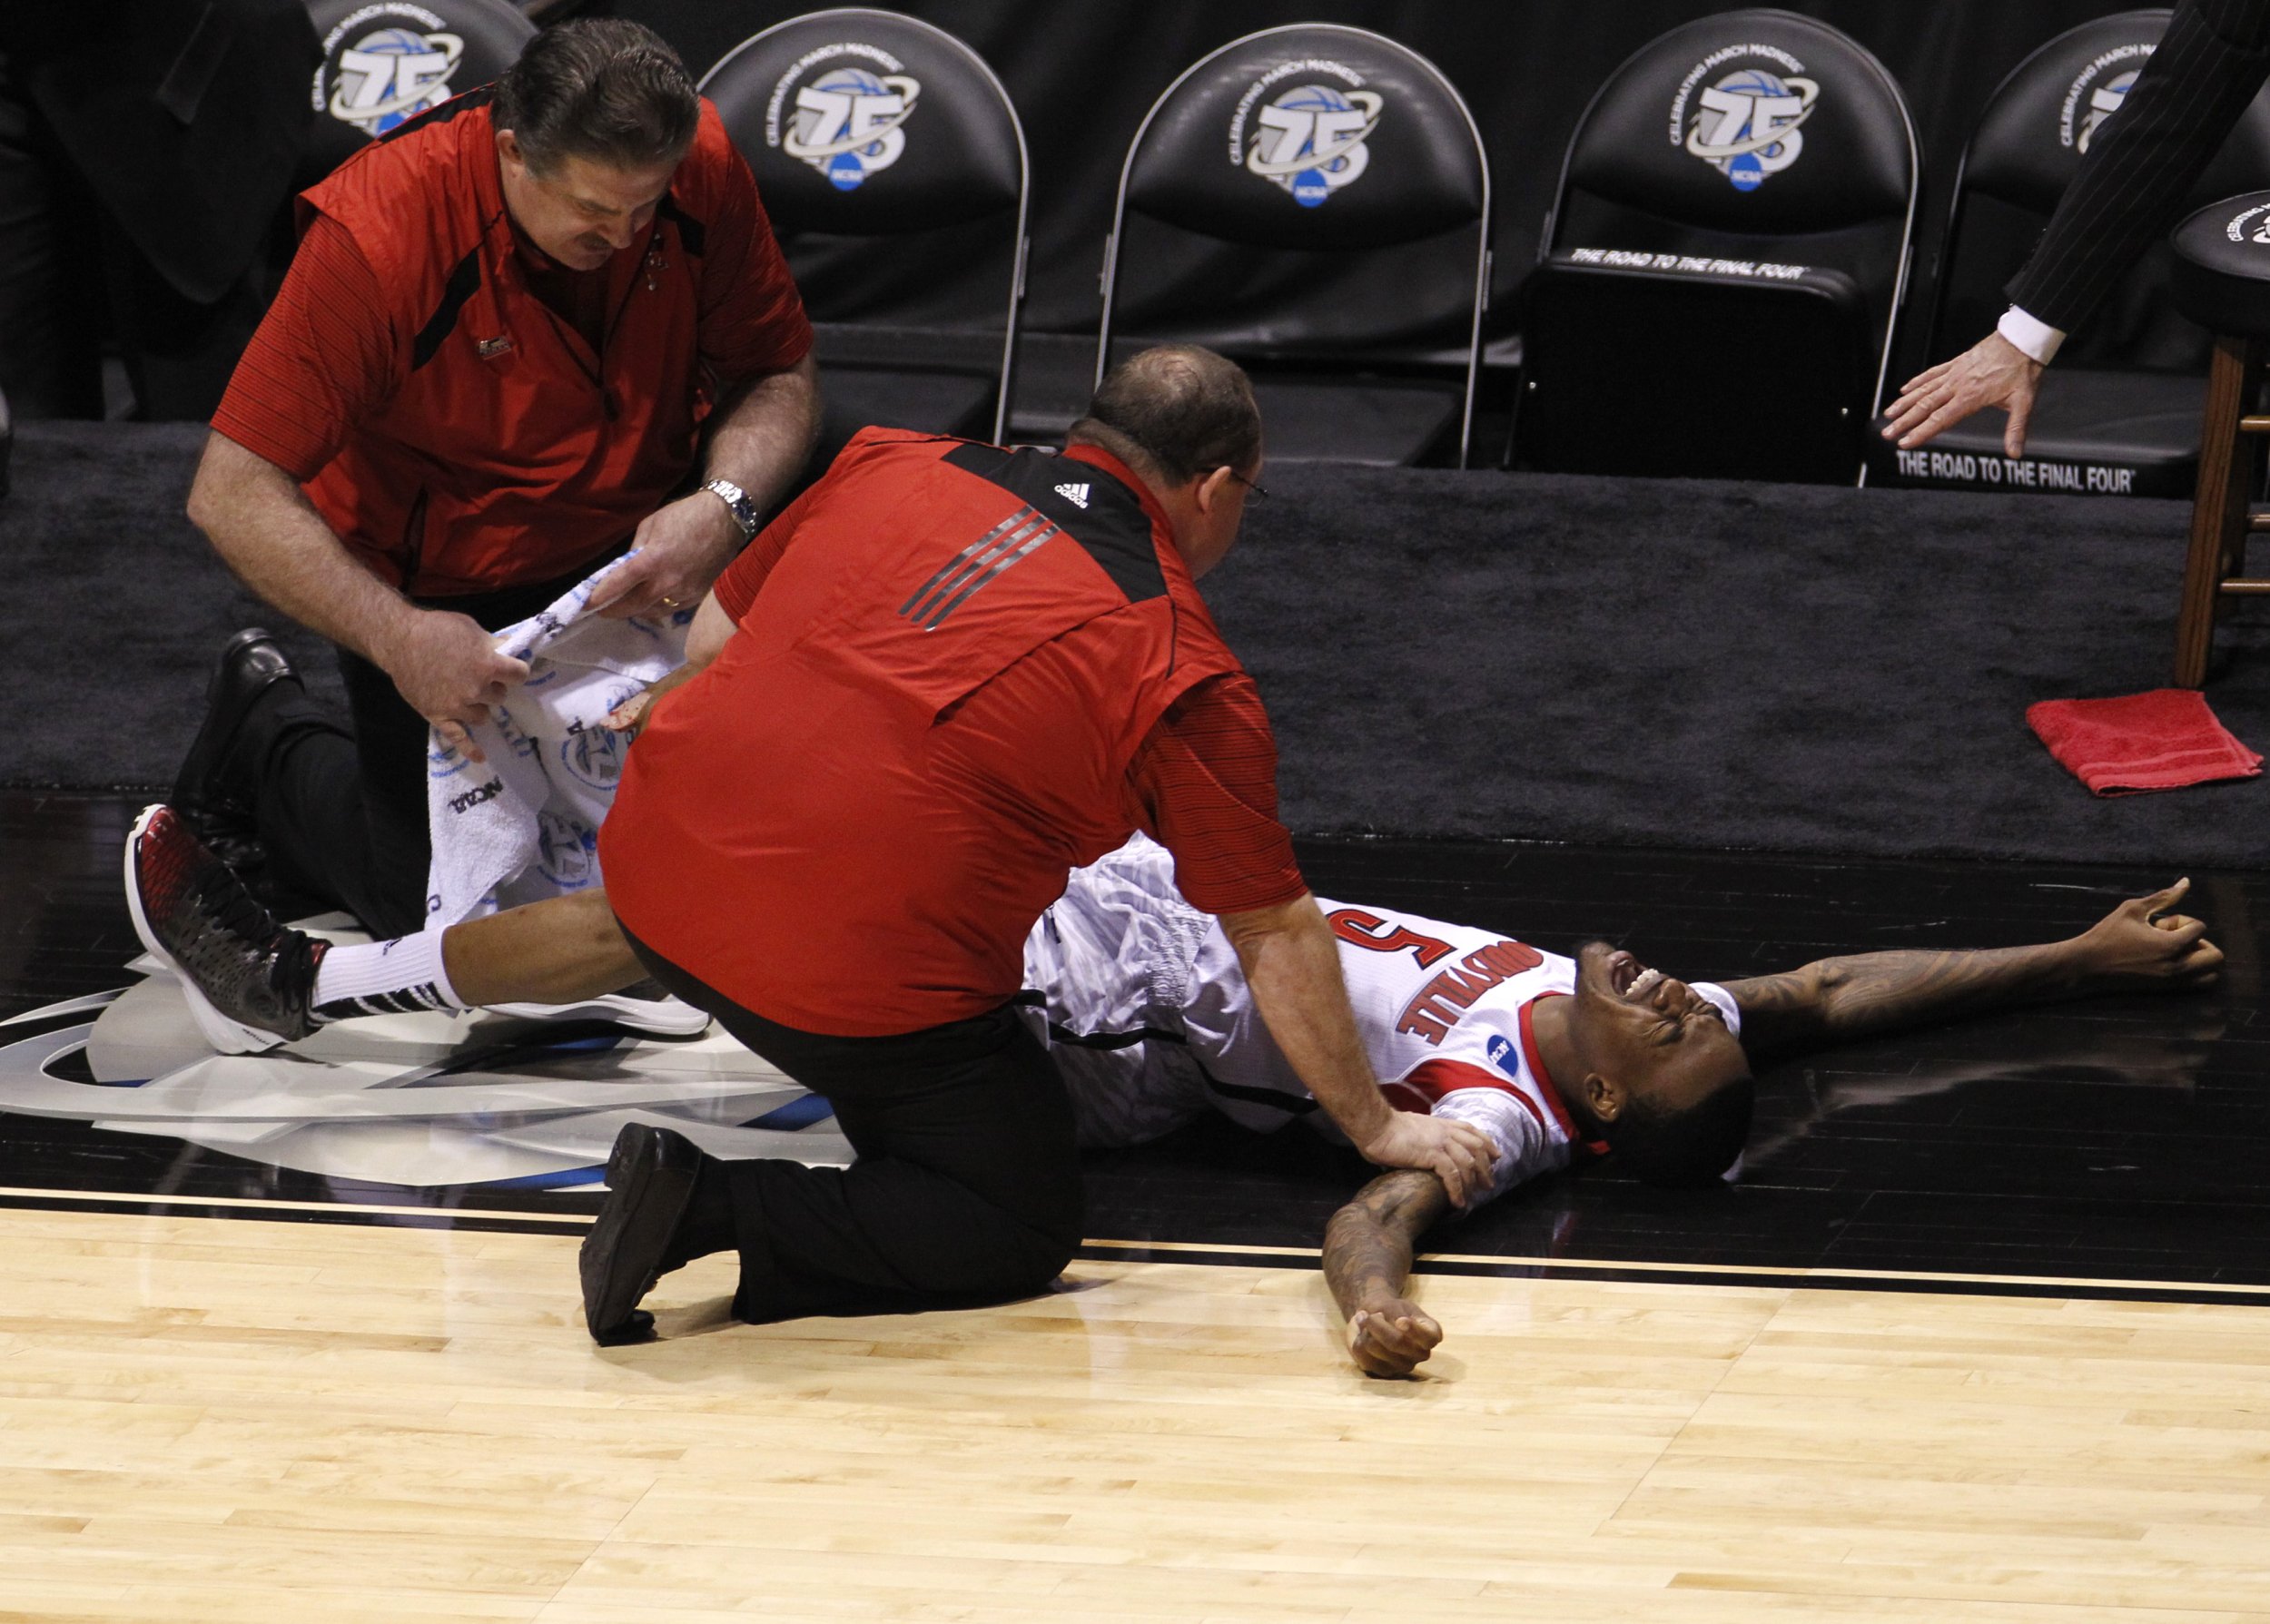 Kevin Ware's Broken Leg Injury and 6 Other Gruesome Sports Injuries